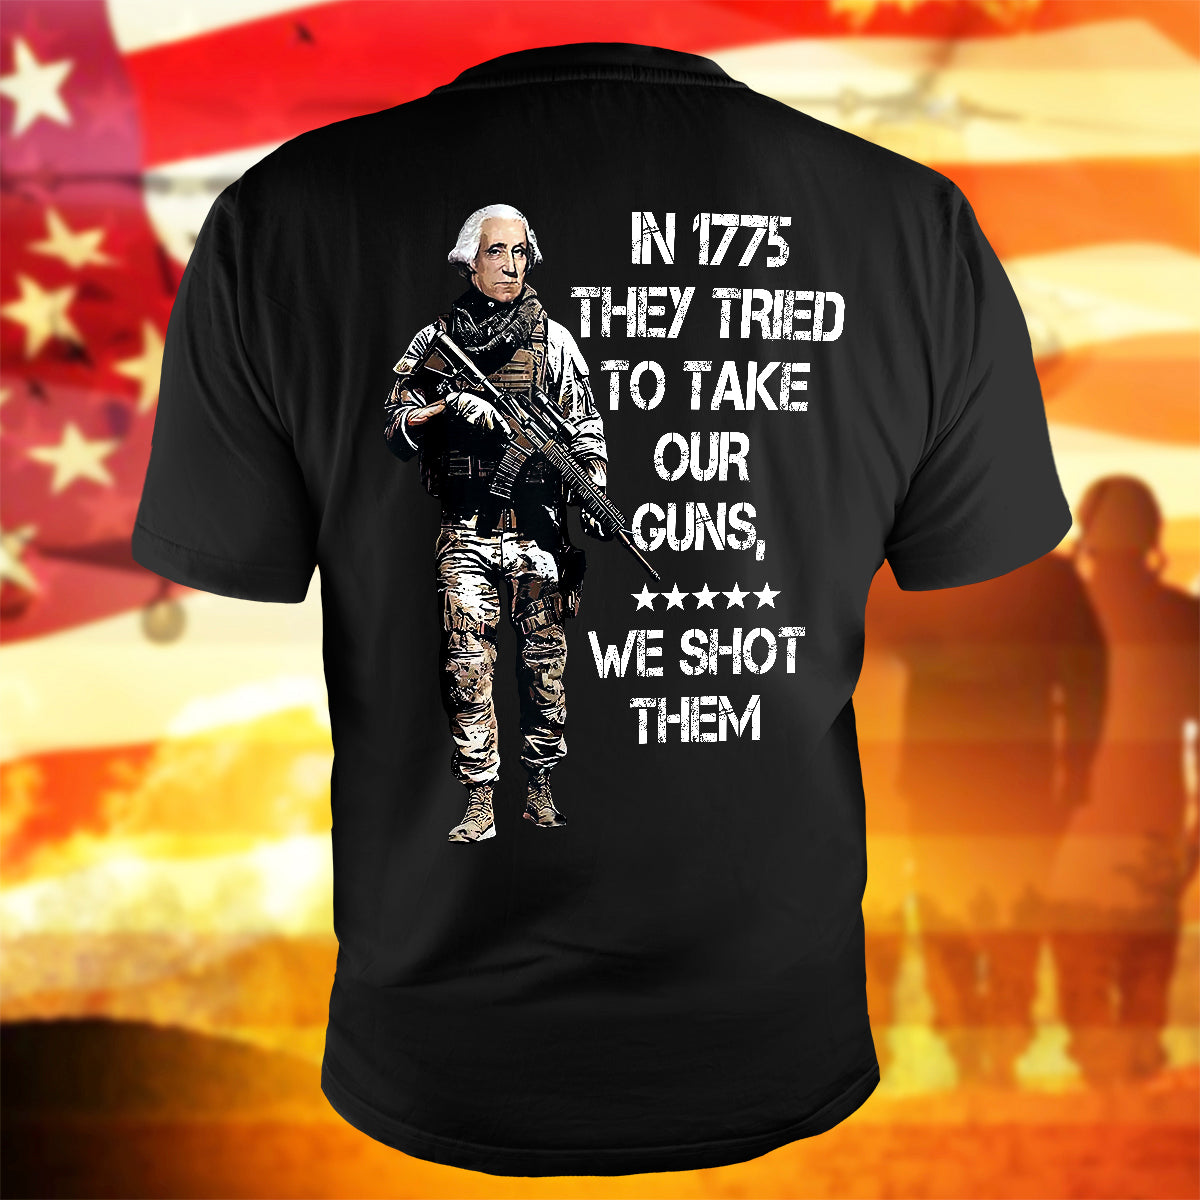 1775 American Revolution T-Shirt In 1775 They Tried To Take Out Guns Shirt Independent Gift